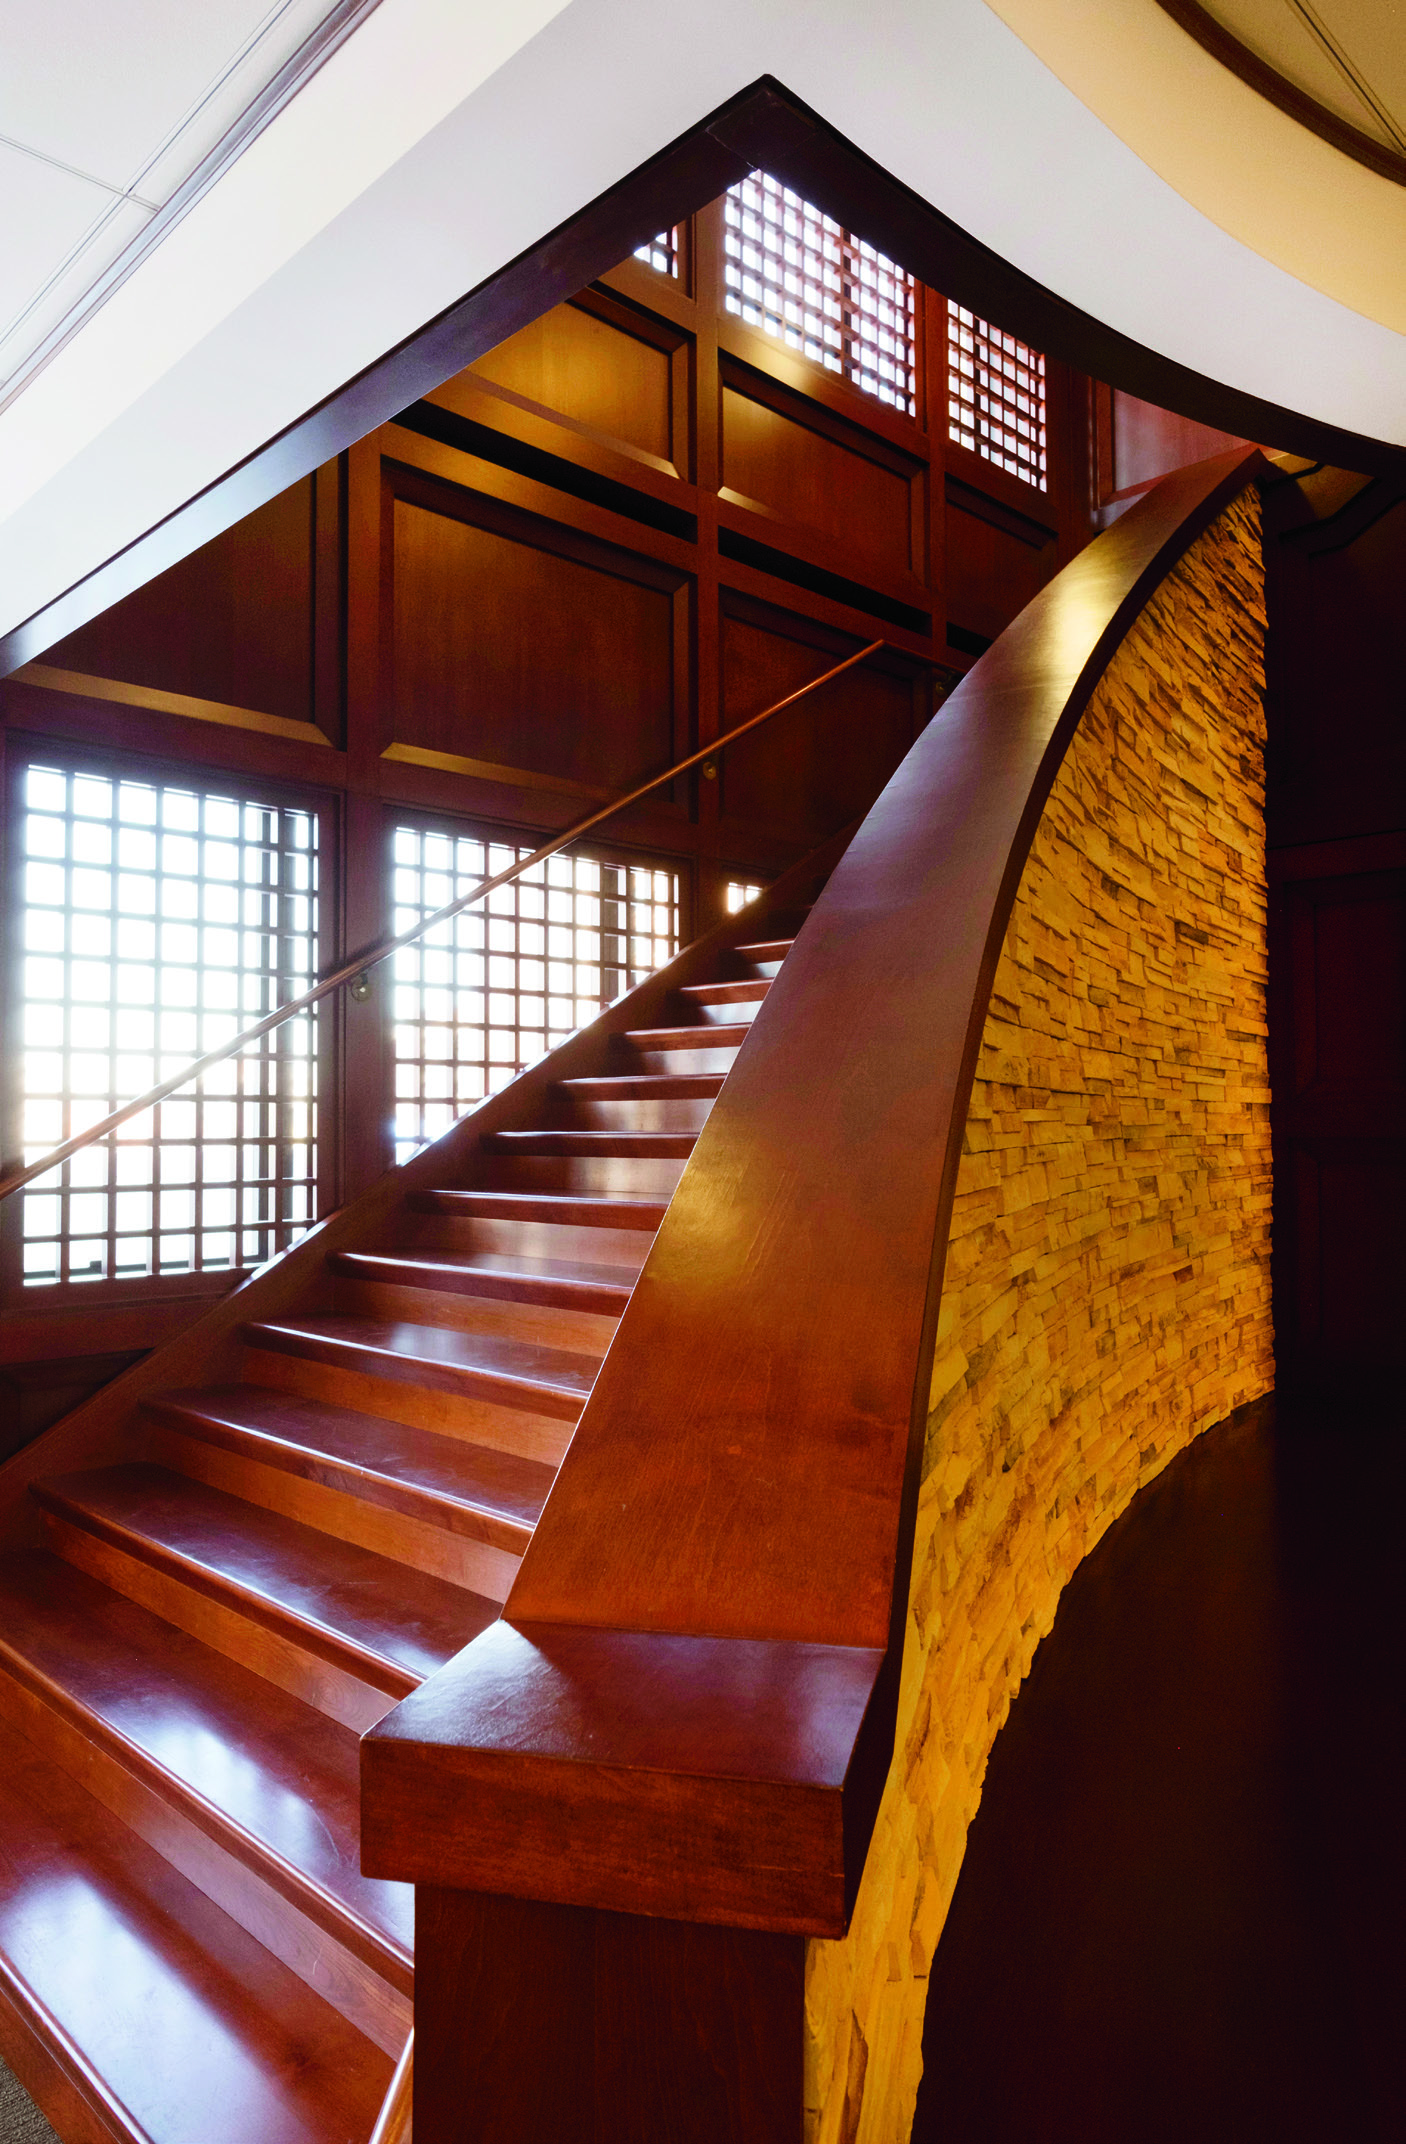 The Teachers College Reading and Writing Project’s grand staircase, on Thorndike Hall’s seventh and eighth floors.